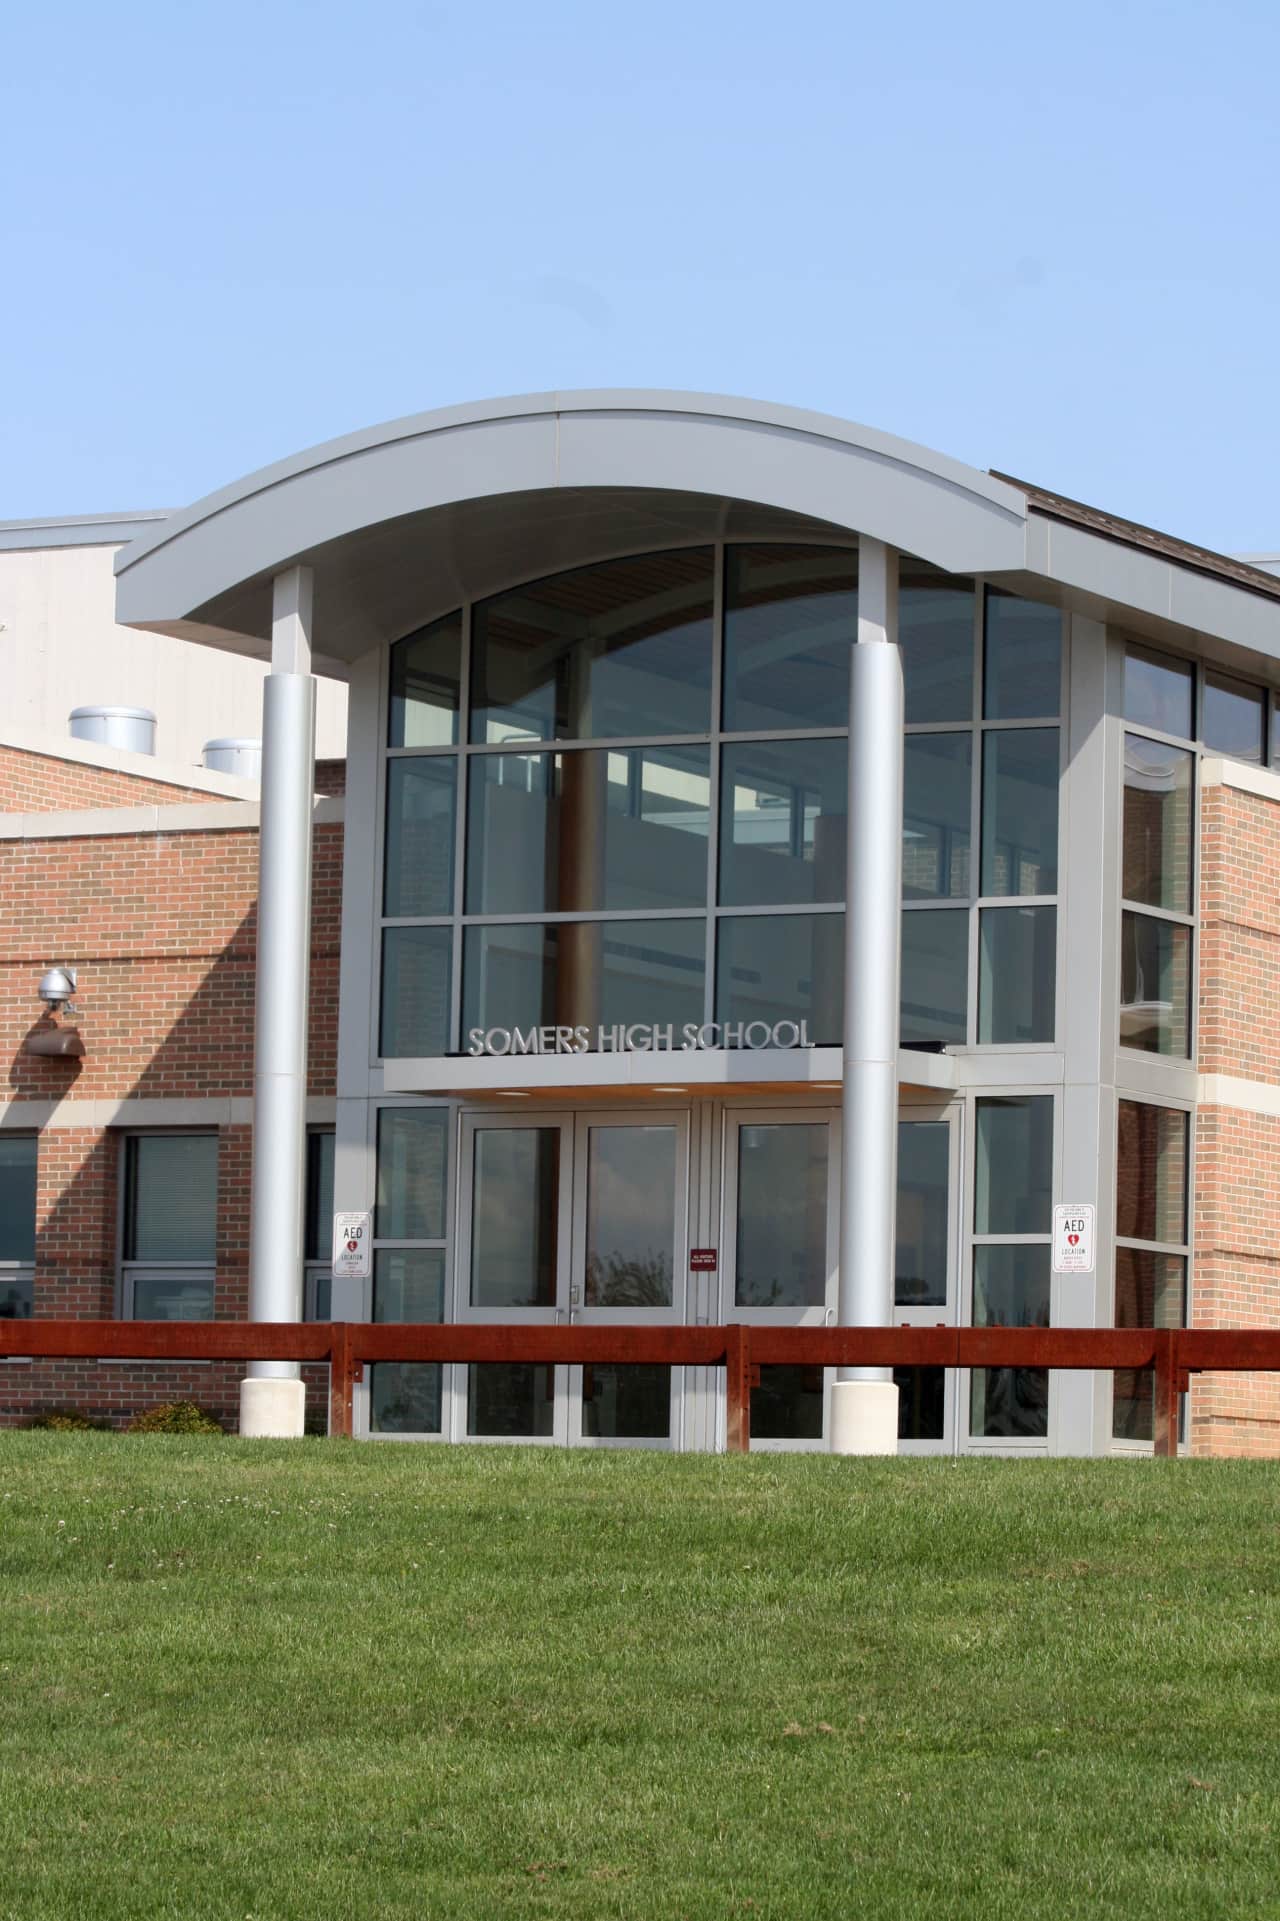 Somers High School will host the Somers Holocaust Memorial Commission's annual program.